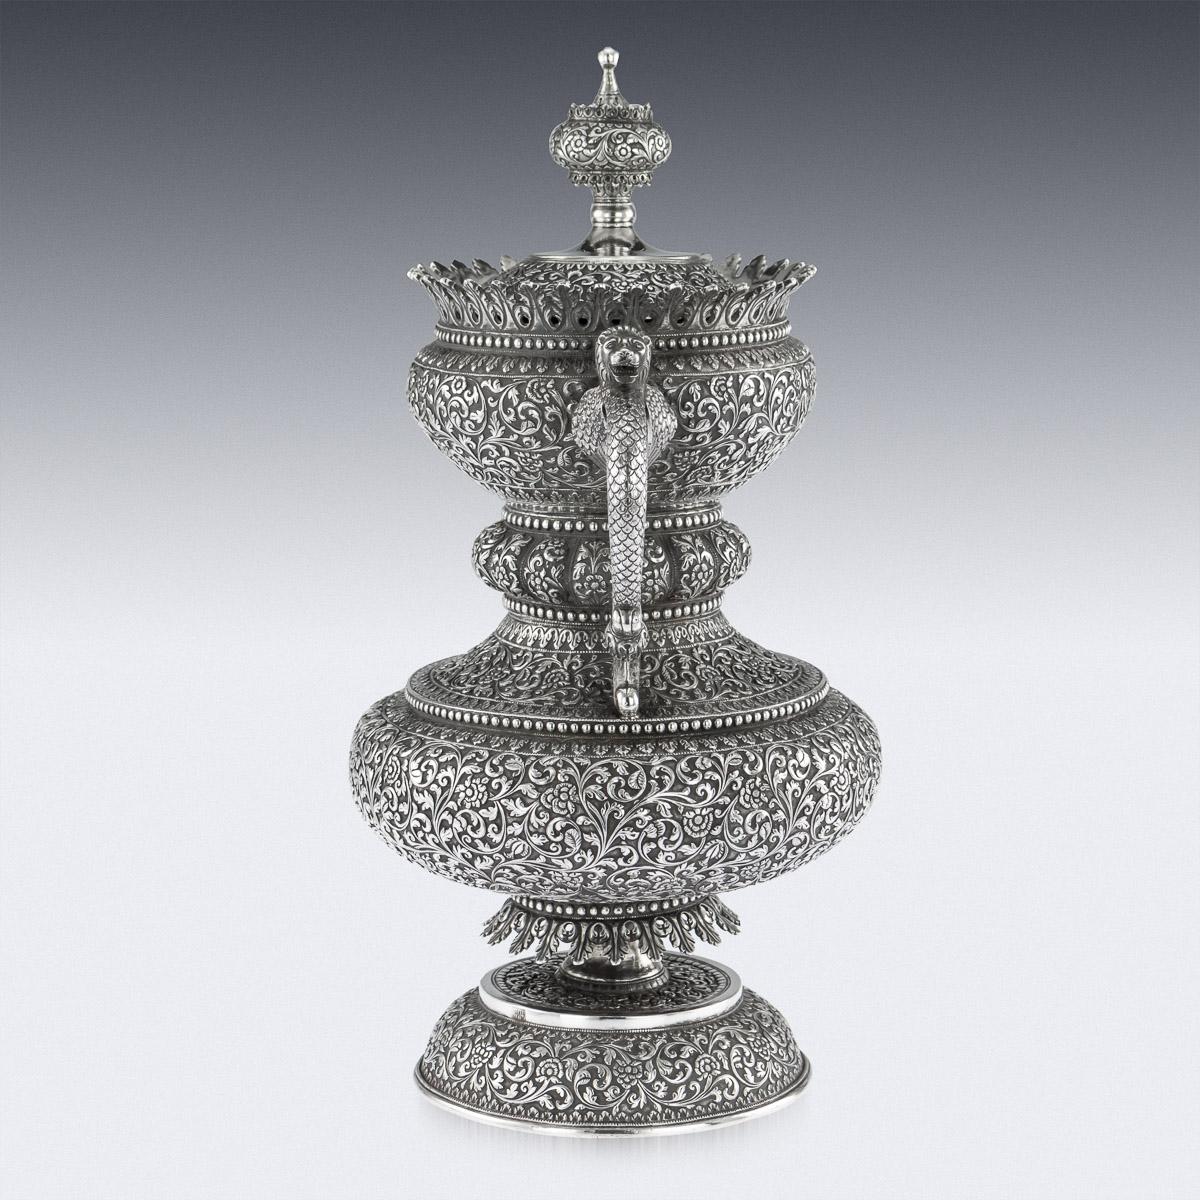 Antique 19th century Indian Colonial solid silver Cutch presentation cup with cover, unusually shaped body resting on a circular domed foot, the sides applied with a scroll handles terminating with mythological winged lions, possibly the depiction